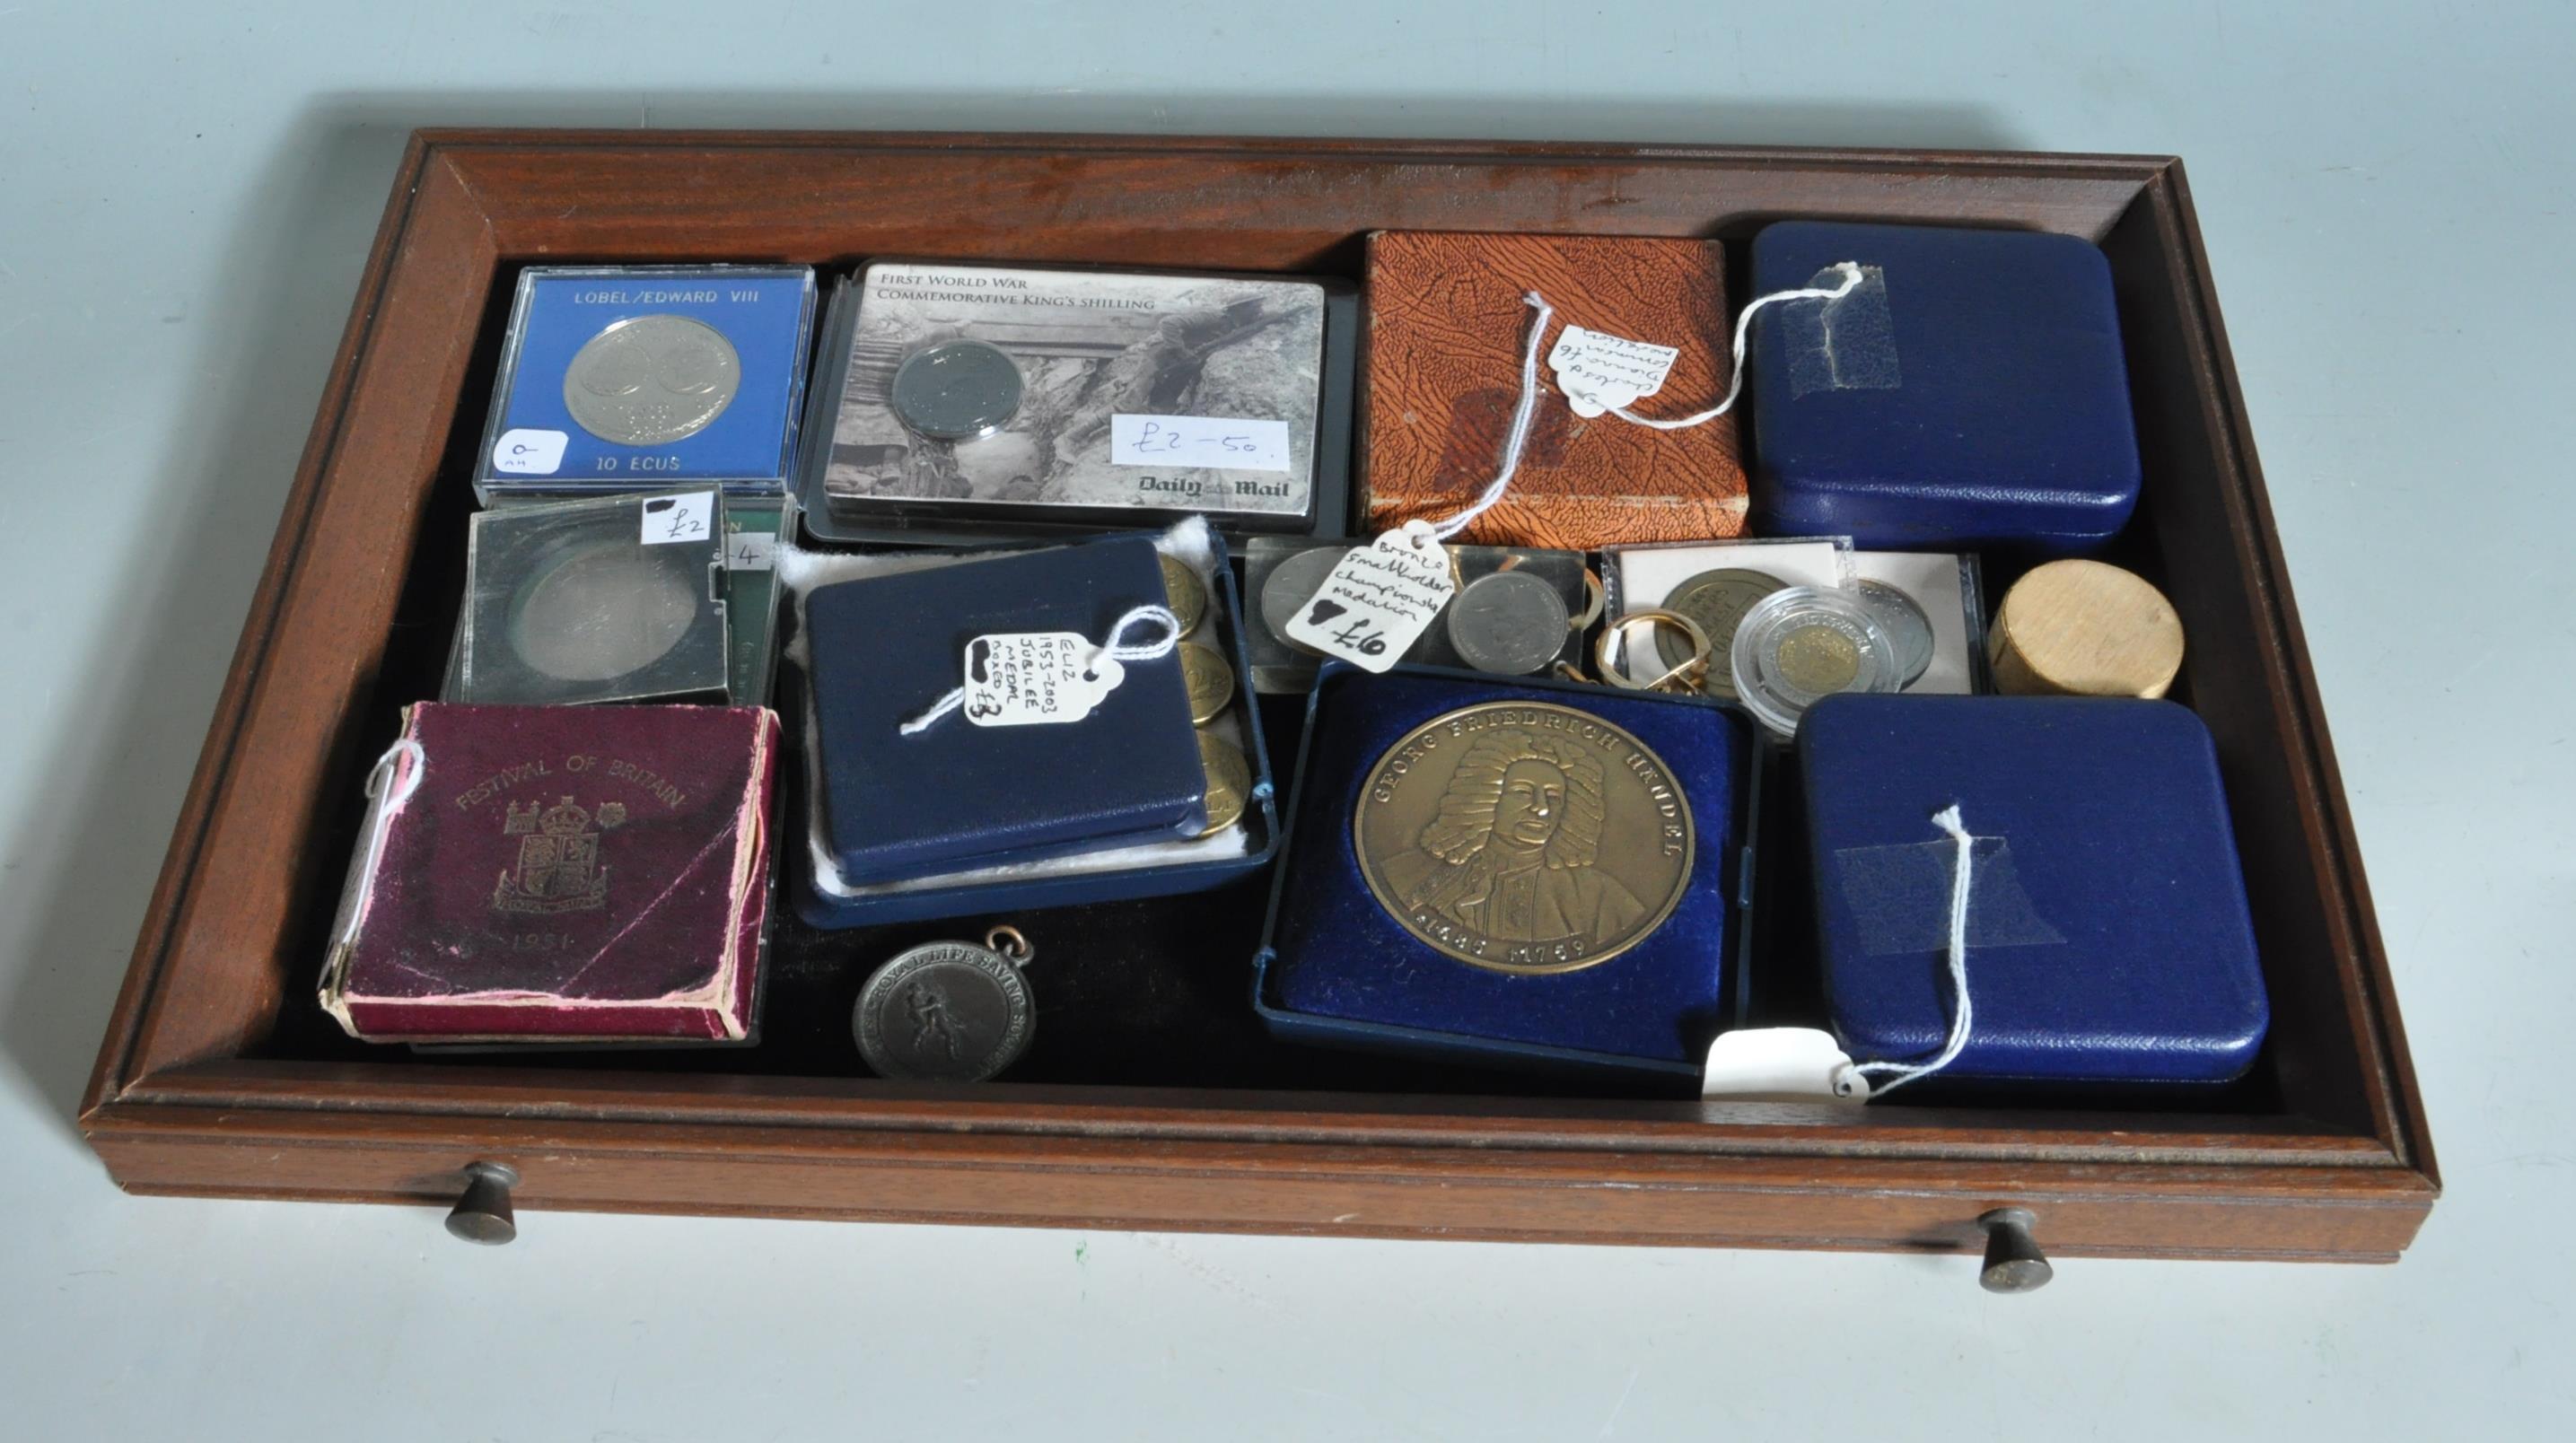 COLLECTION OF COINS AND MEDALS IN A WOODEN BOX - Image 2 of 11